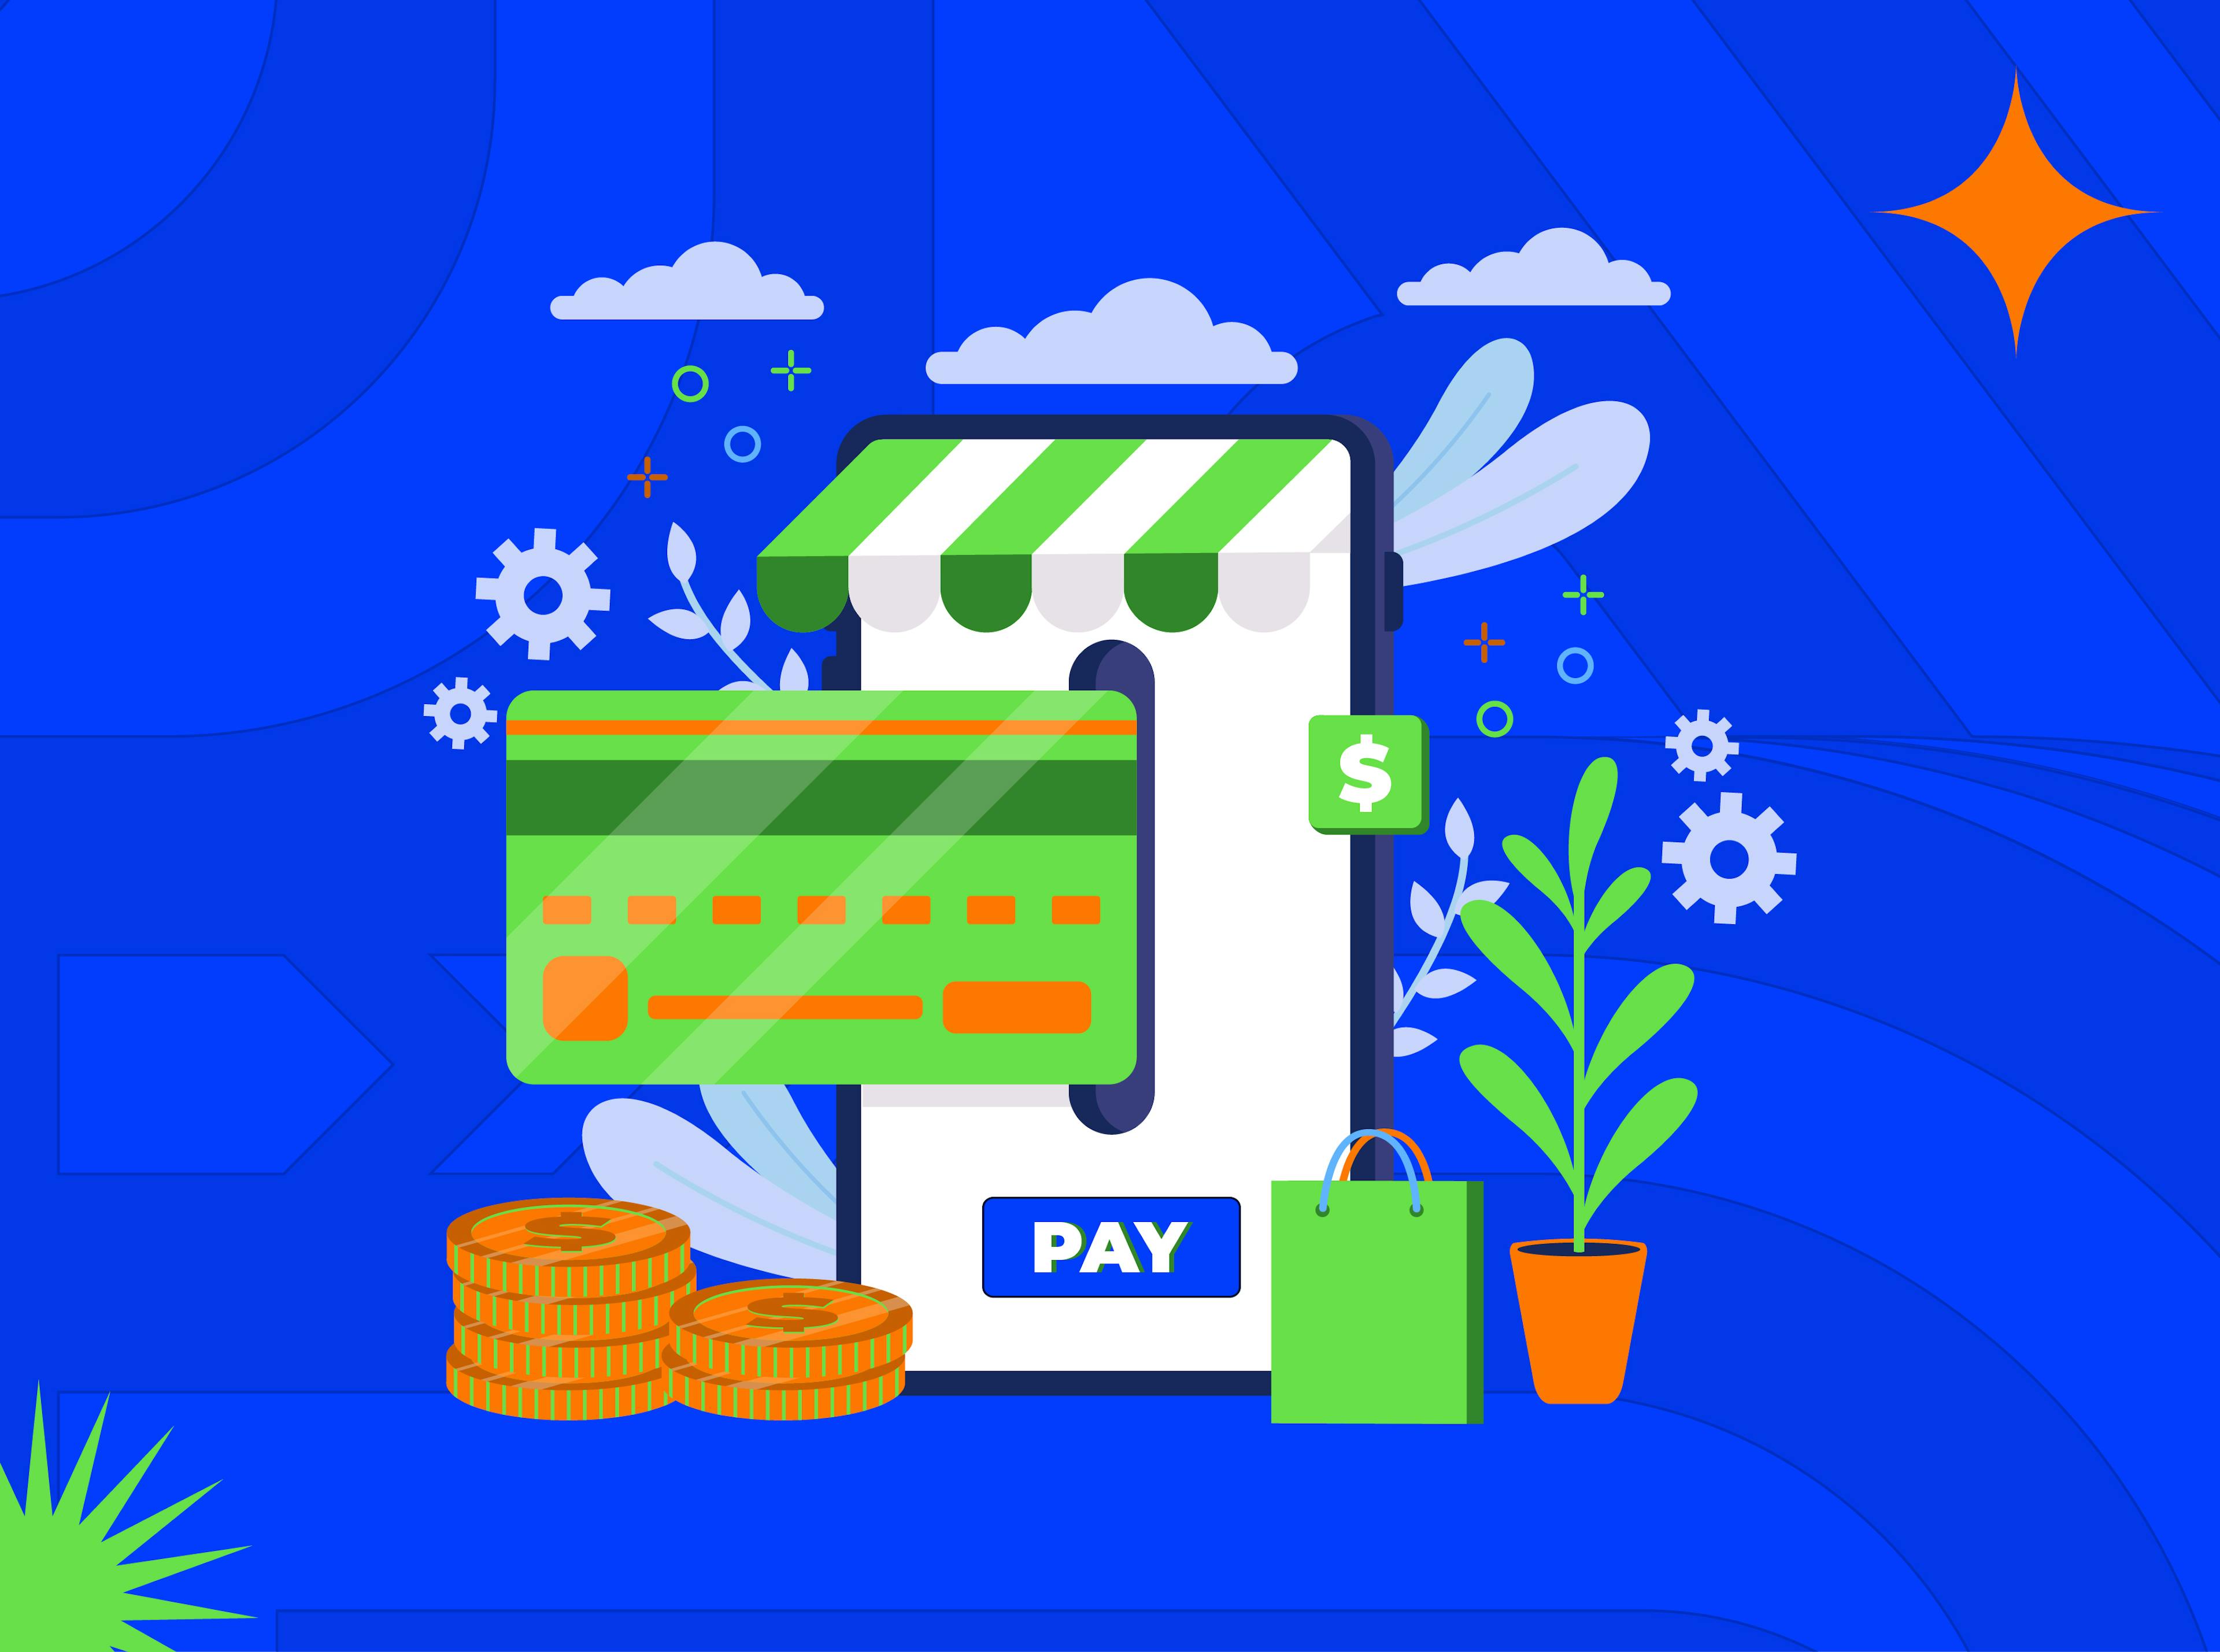 How to create your own payment gateway